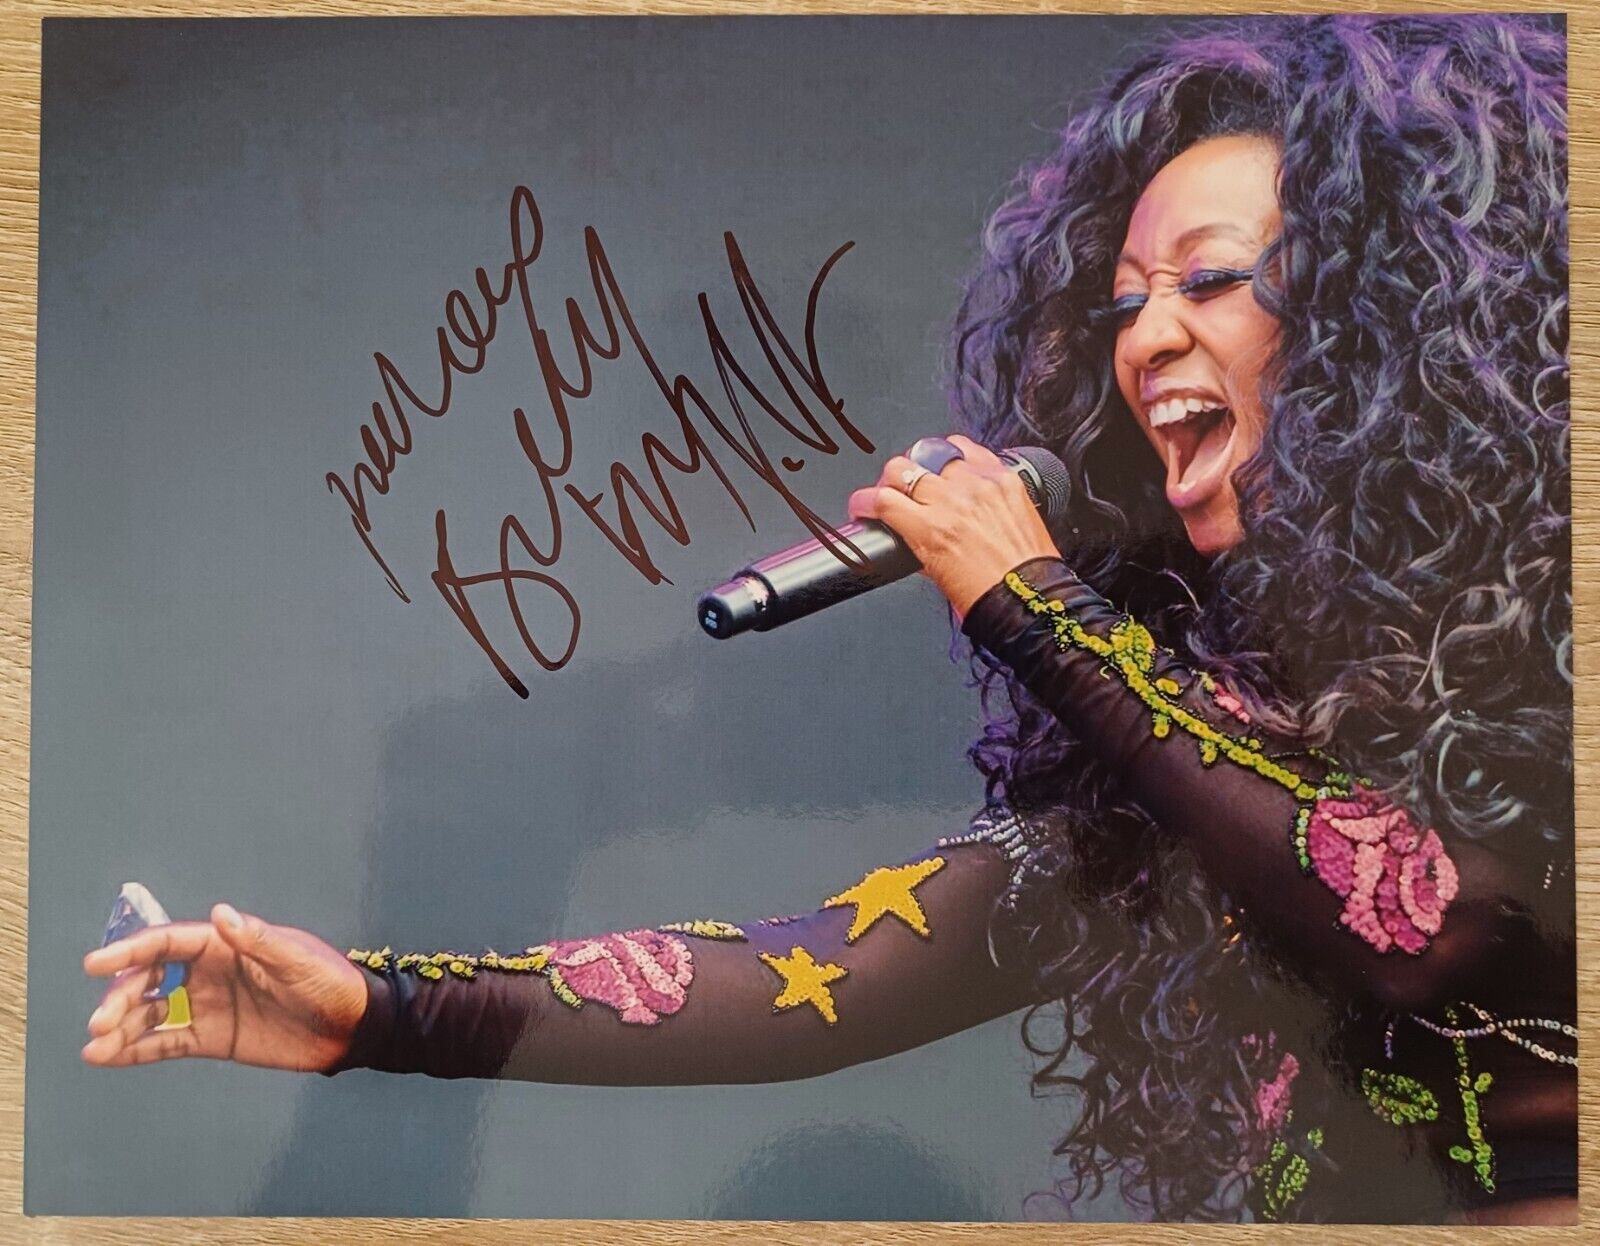 Beverley Knight - Genuine signed in person autograph 8x10 (Singer/Song Writer)